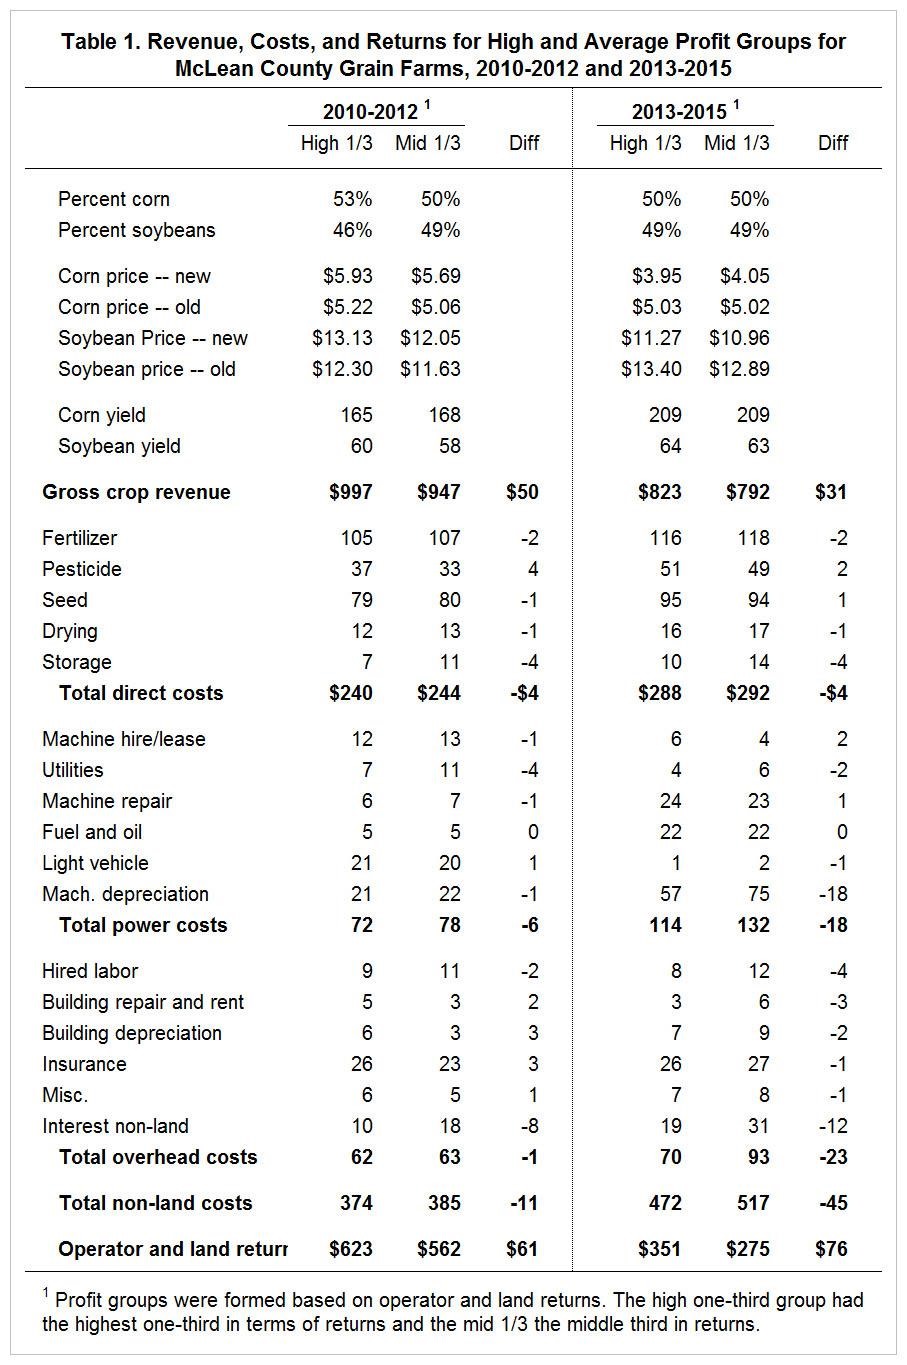 Differences On Revenue And Costs For Higher And Average Return Grain Farms